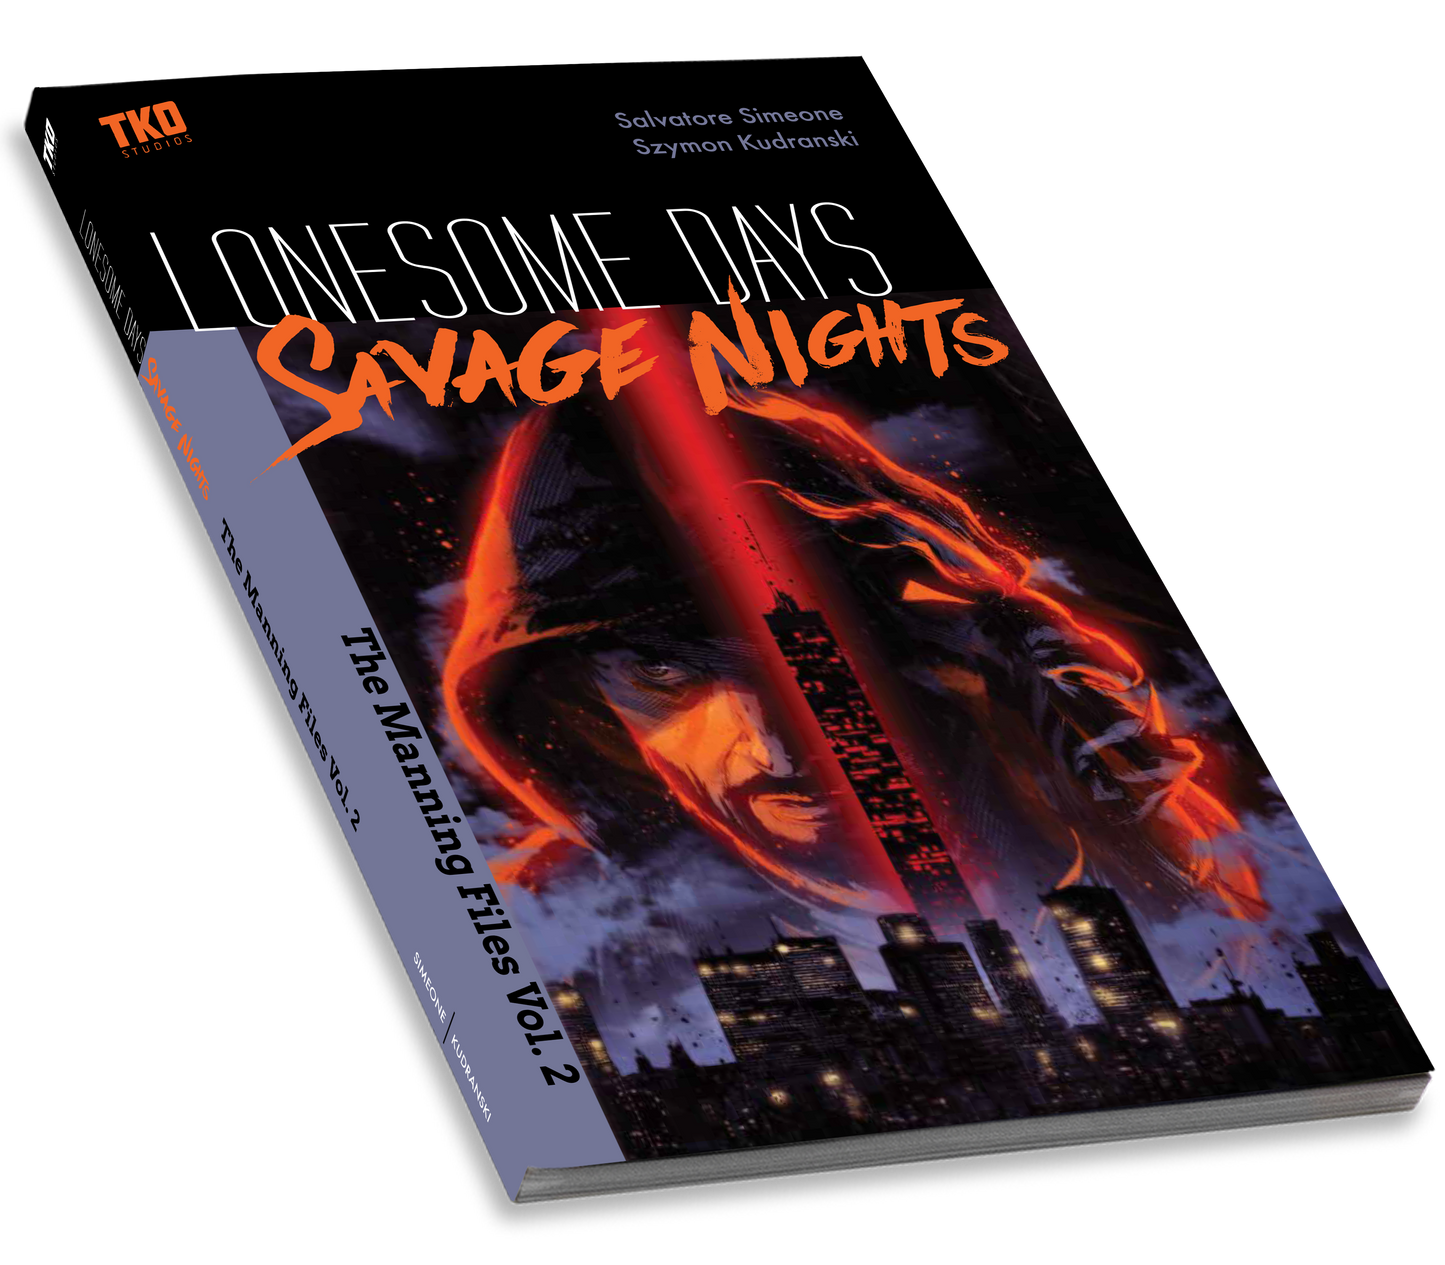 Lonesome Days, Savage Nights: The Manning Files Vol. 2